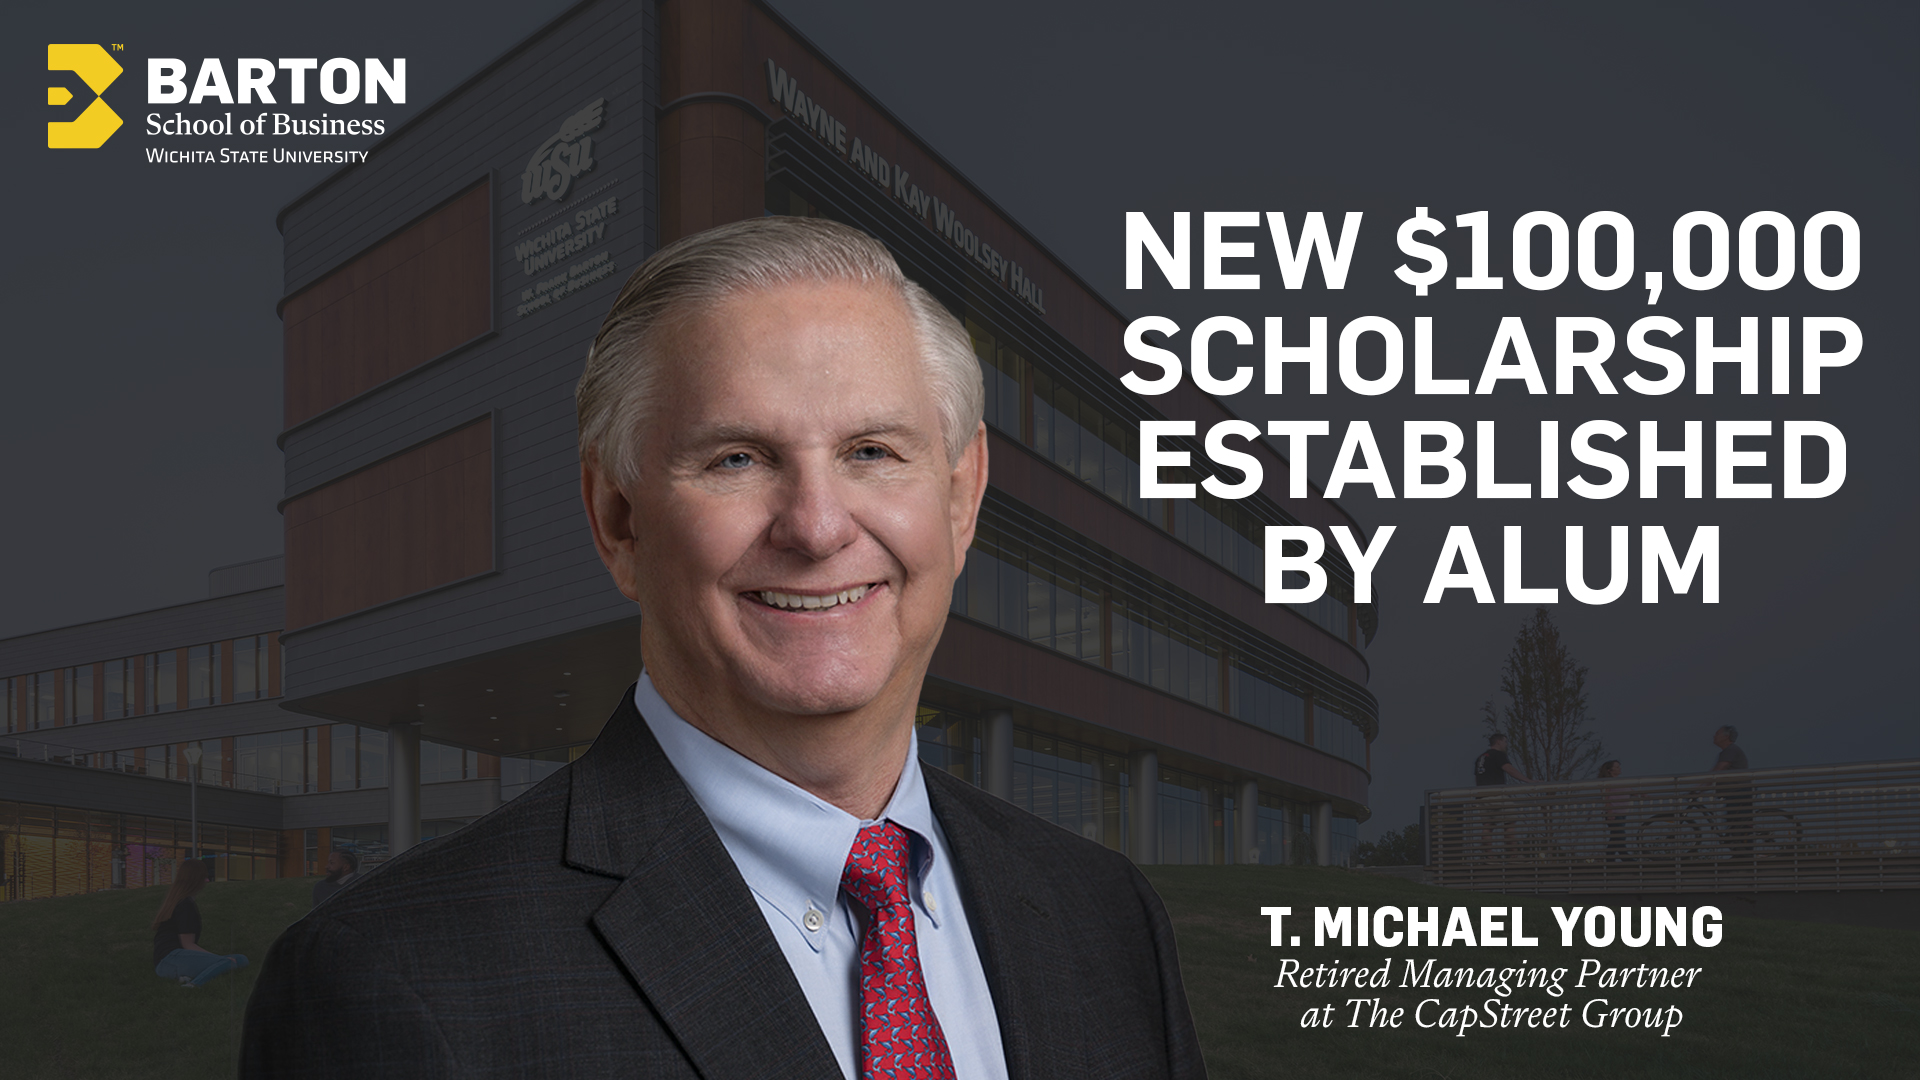 New $100,000 Scholarship Established by Alum T. Michael Young, a retired managing partner at The CapStreet Group.